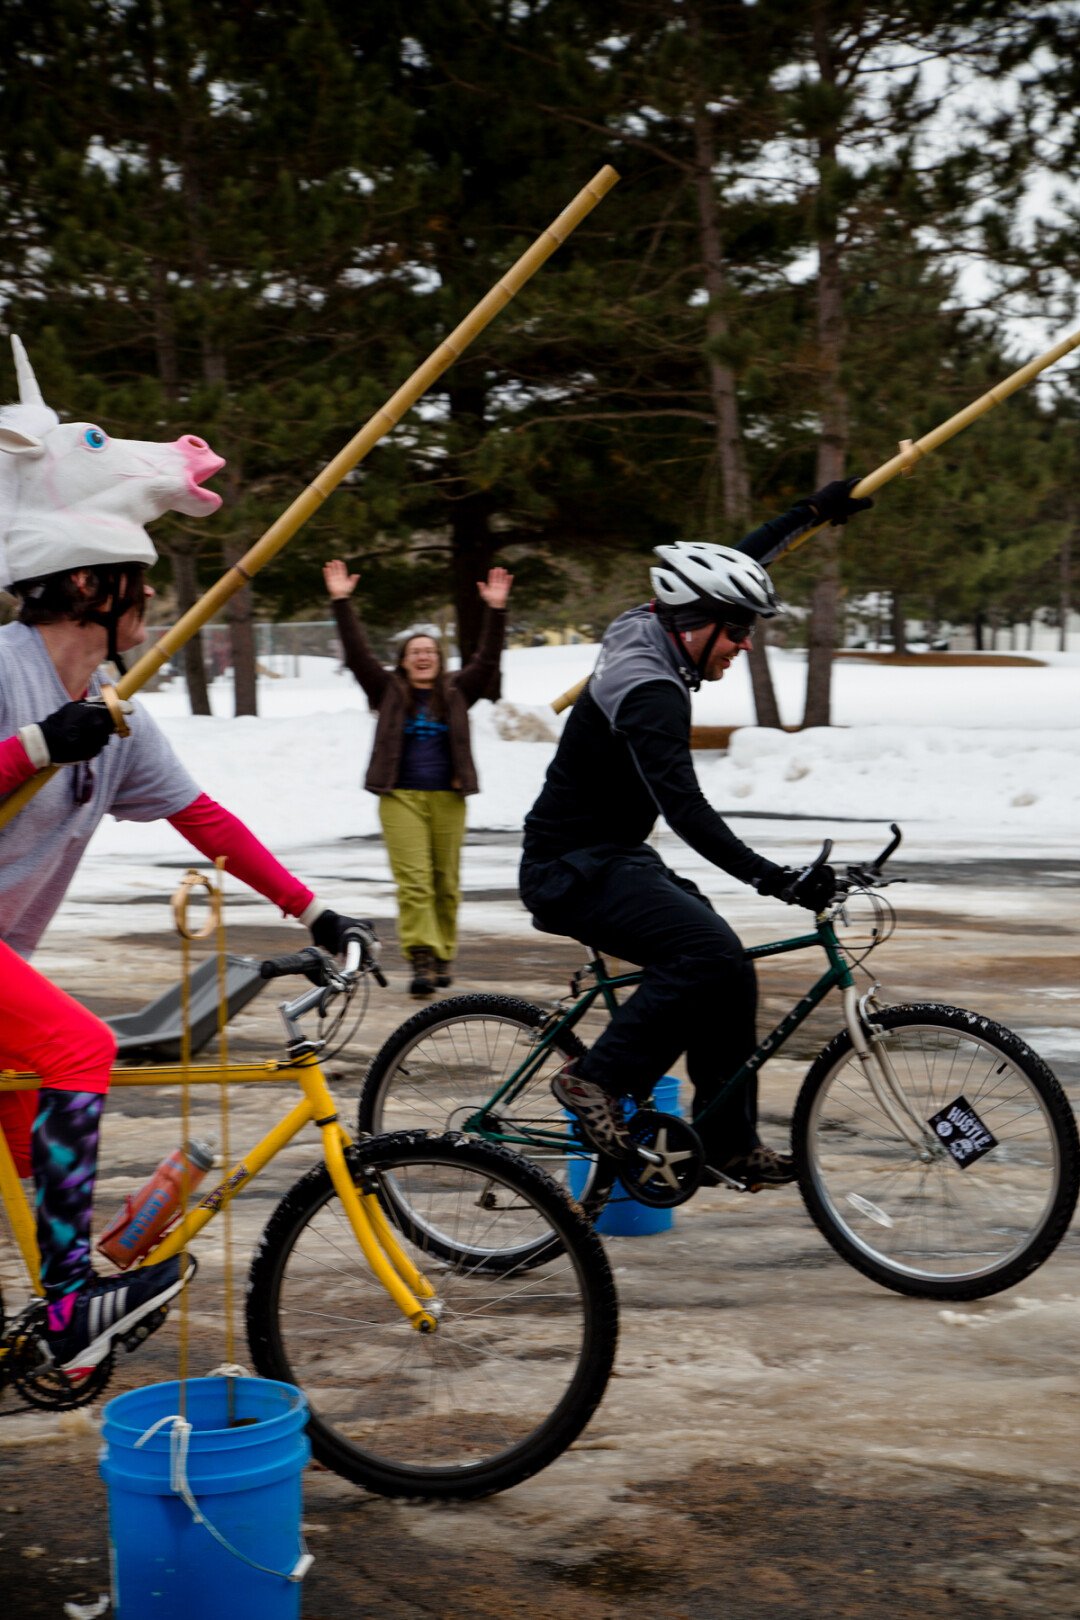 JOUST ANOTHER BIKE RACE? Competitors snag a shiny ring – just one challenge found in the 9th Annual St. Valentine’s Day Hustle held Feb. 9 in Menomonie. Bikers raced around scenic Lake Menomin in this friendly alleycat-style bike race. A portion of the proceeds went to the Dunn County Humane Society.